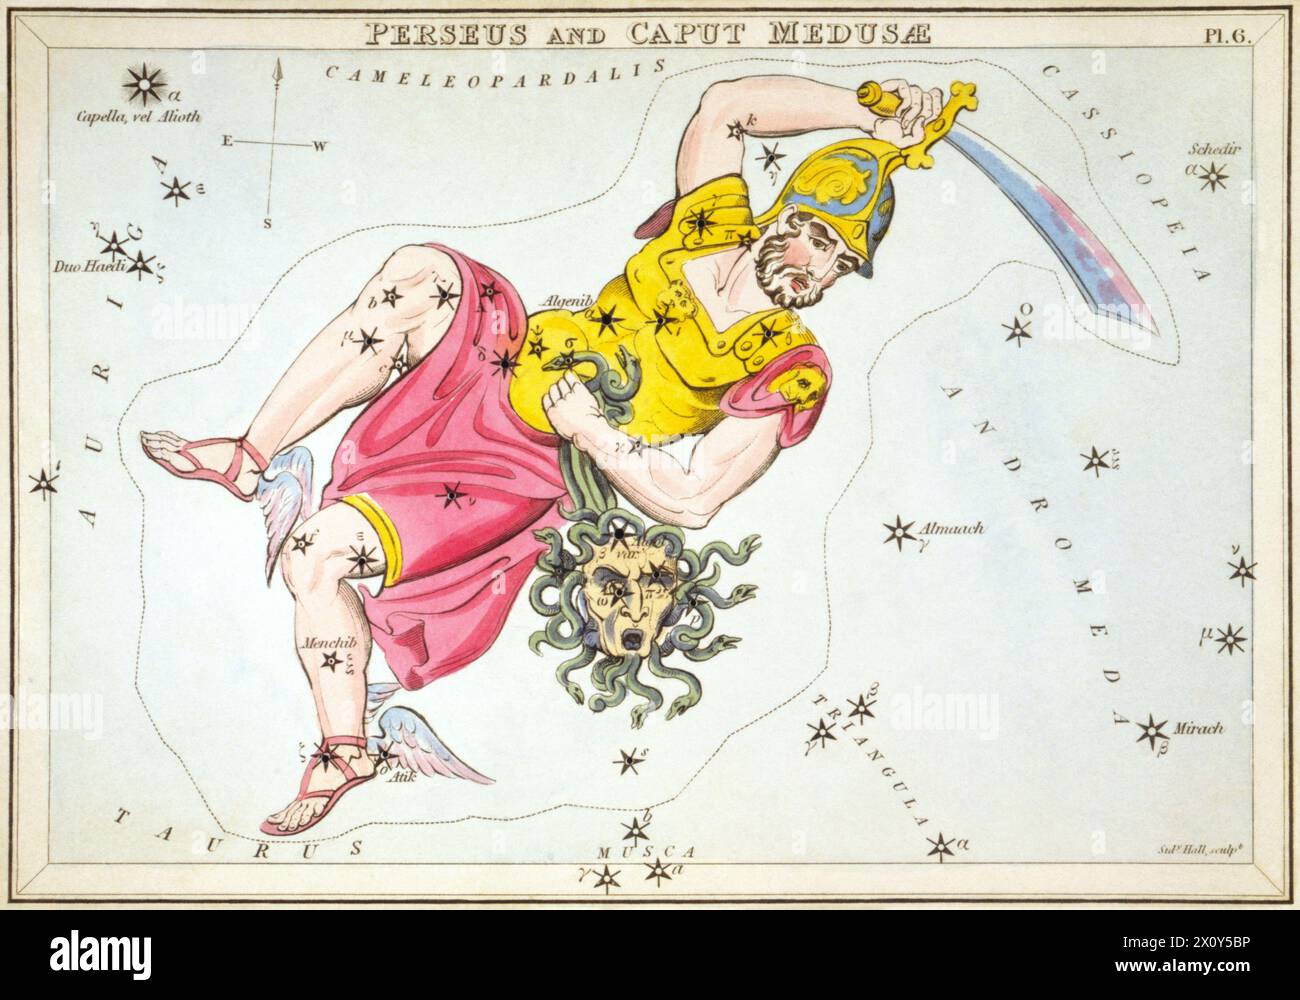 Perseus and Caput Medusæ, plate 6 in Urania's Mirror, a set of celestial cards accompanied by A familiar treatise on astronomy ... by Jehoshaphat Aspin. London. Astronomical chart showing Perseus holding bloody sword and the severed head of Medusa forming the constellation. 1 print on layered paper board : etching, hand-colored. Stock Photo